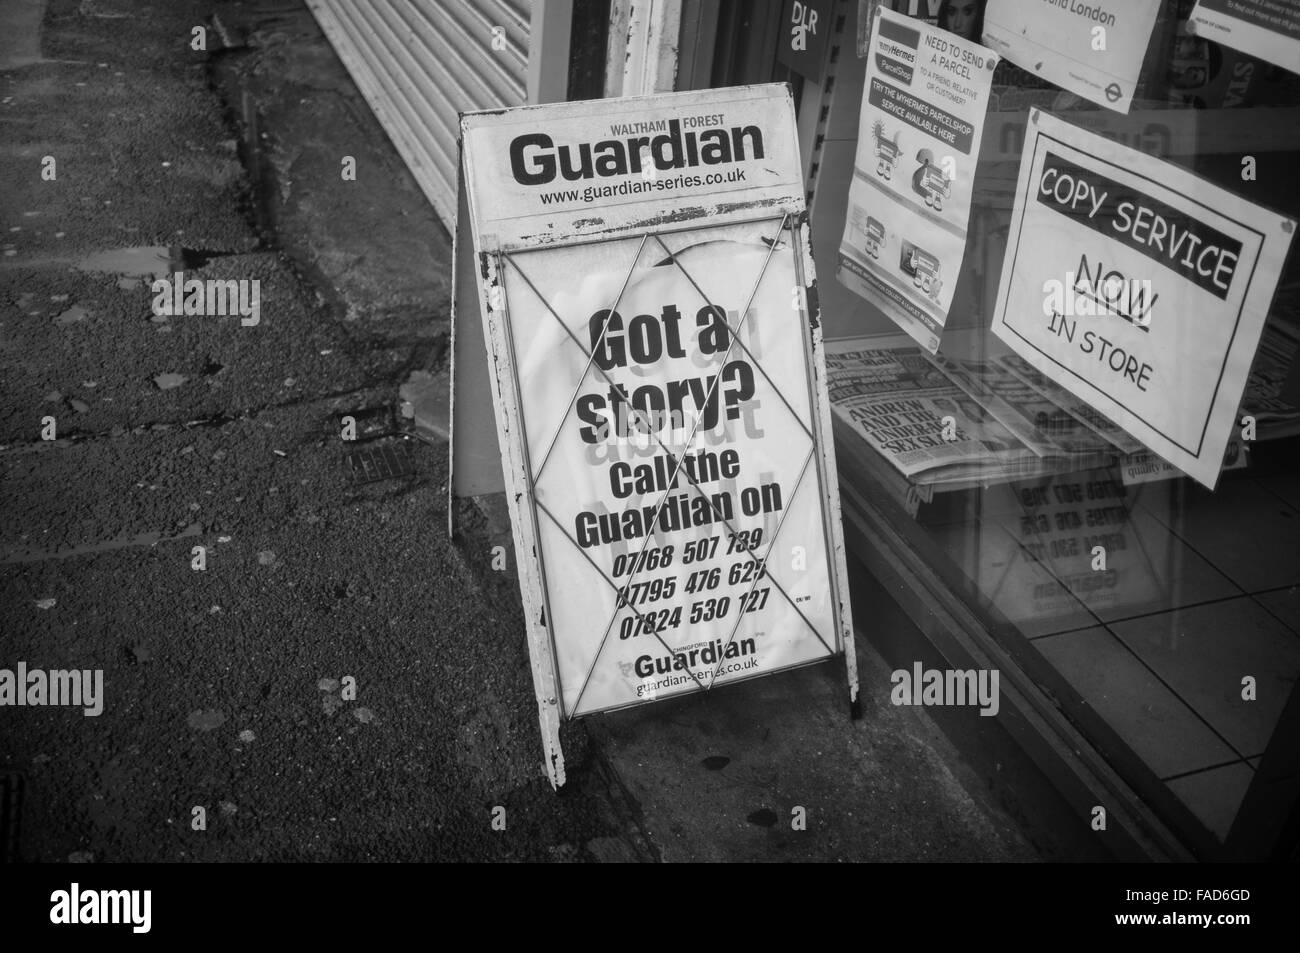 Sign by the Waltham Forest Guardian newspaper asking for stories Stock Photo